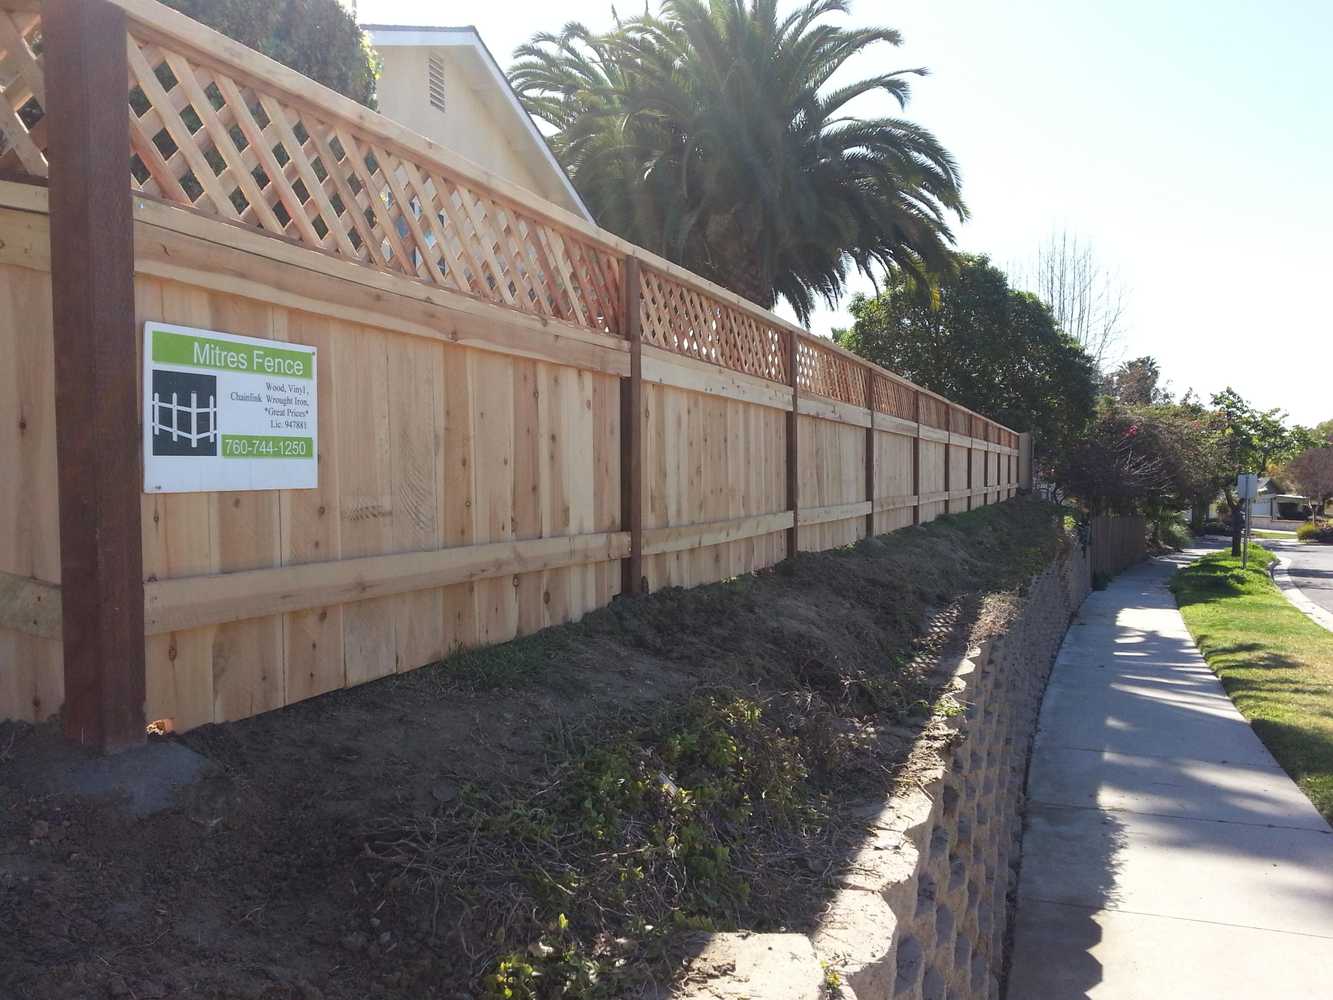 Project photos from Mitre's Fence